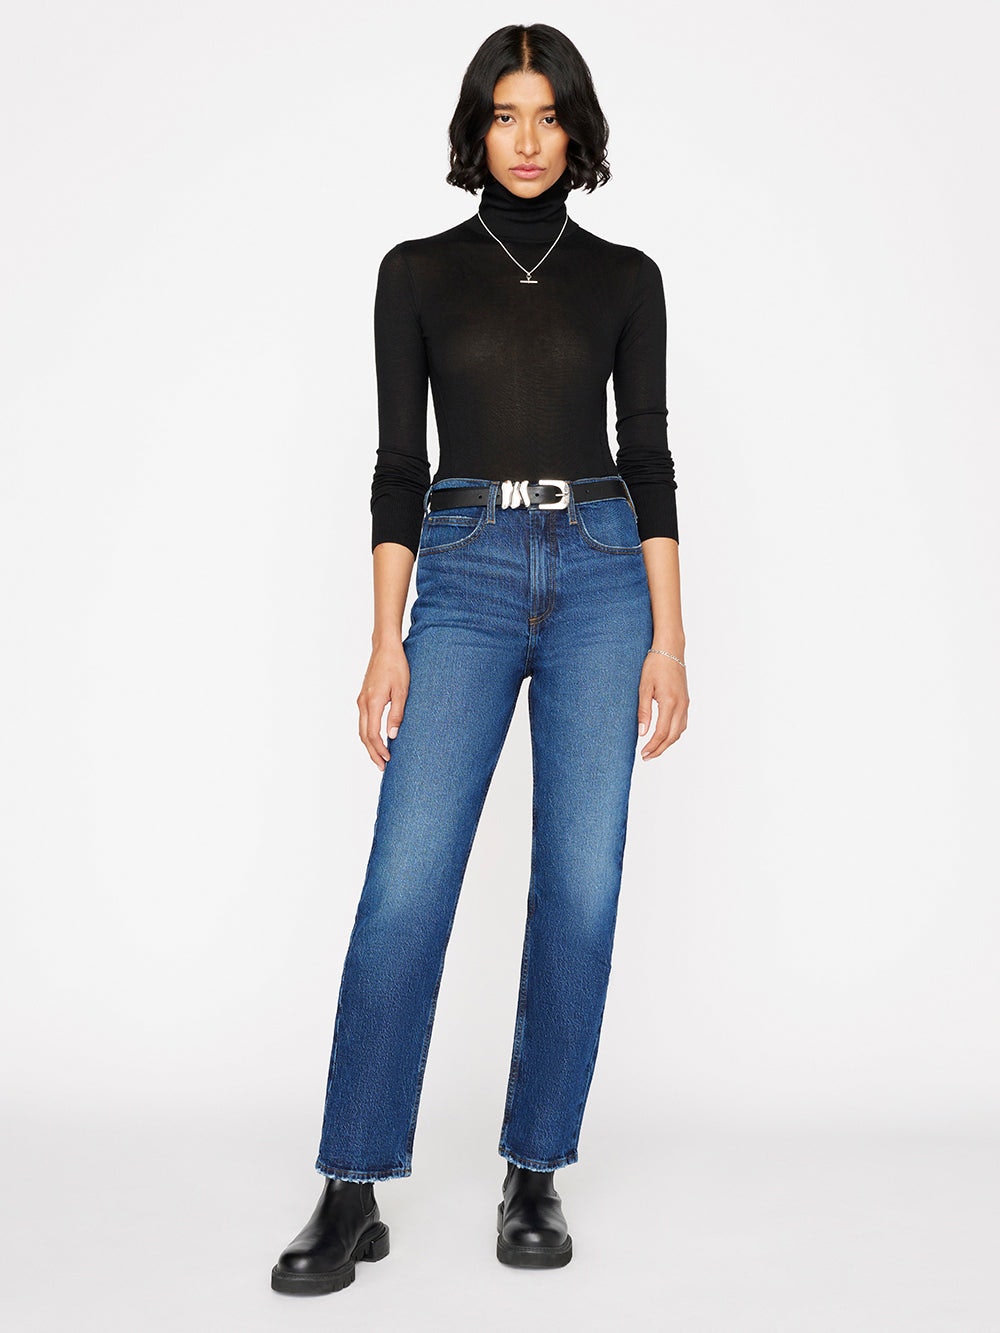 The model is wearing a Frame Le High 'N' Tight Straight - Hallam turtle neck and jeans.